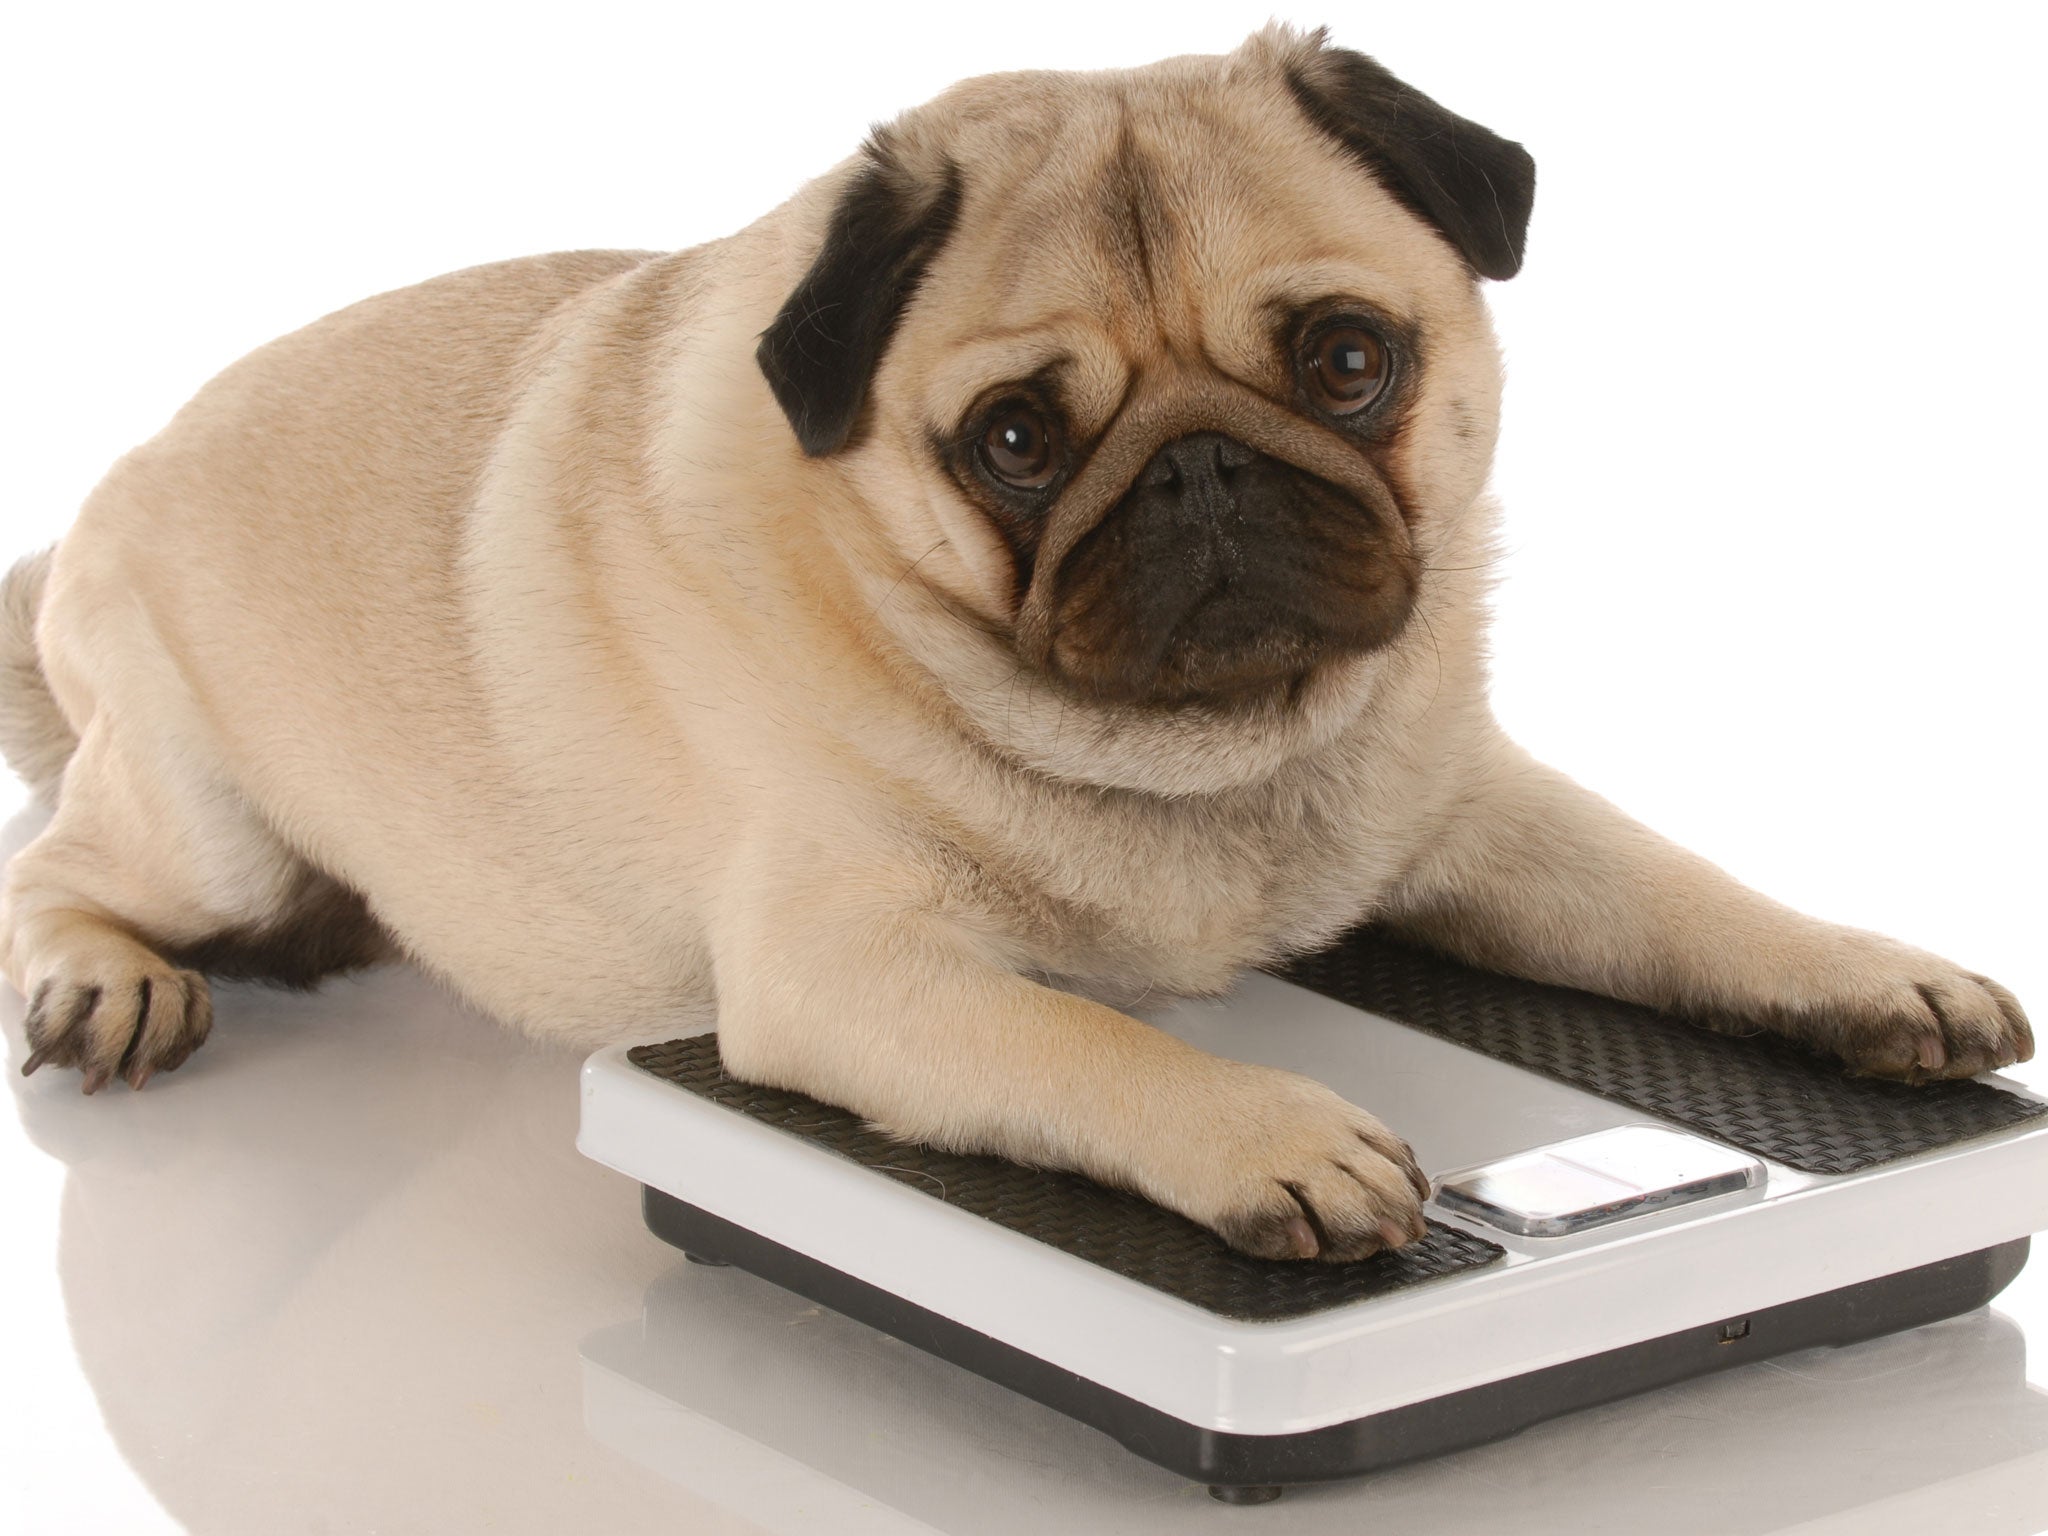 Overfeeding was identified as the key cause of obesity among Britain's pets